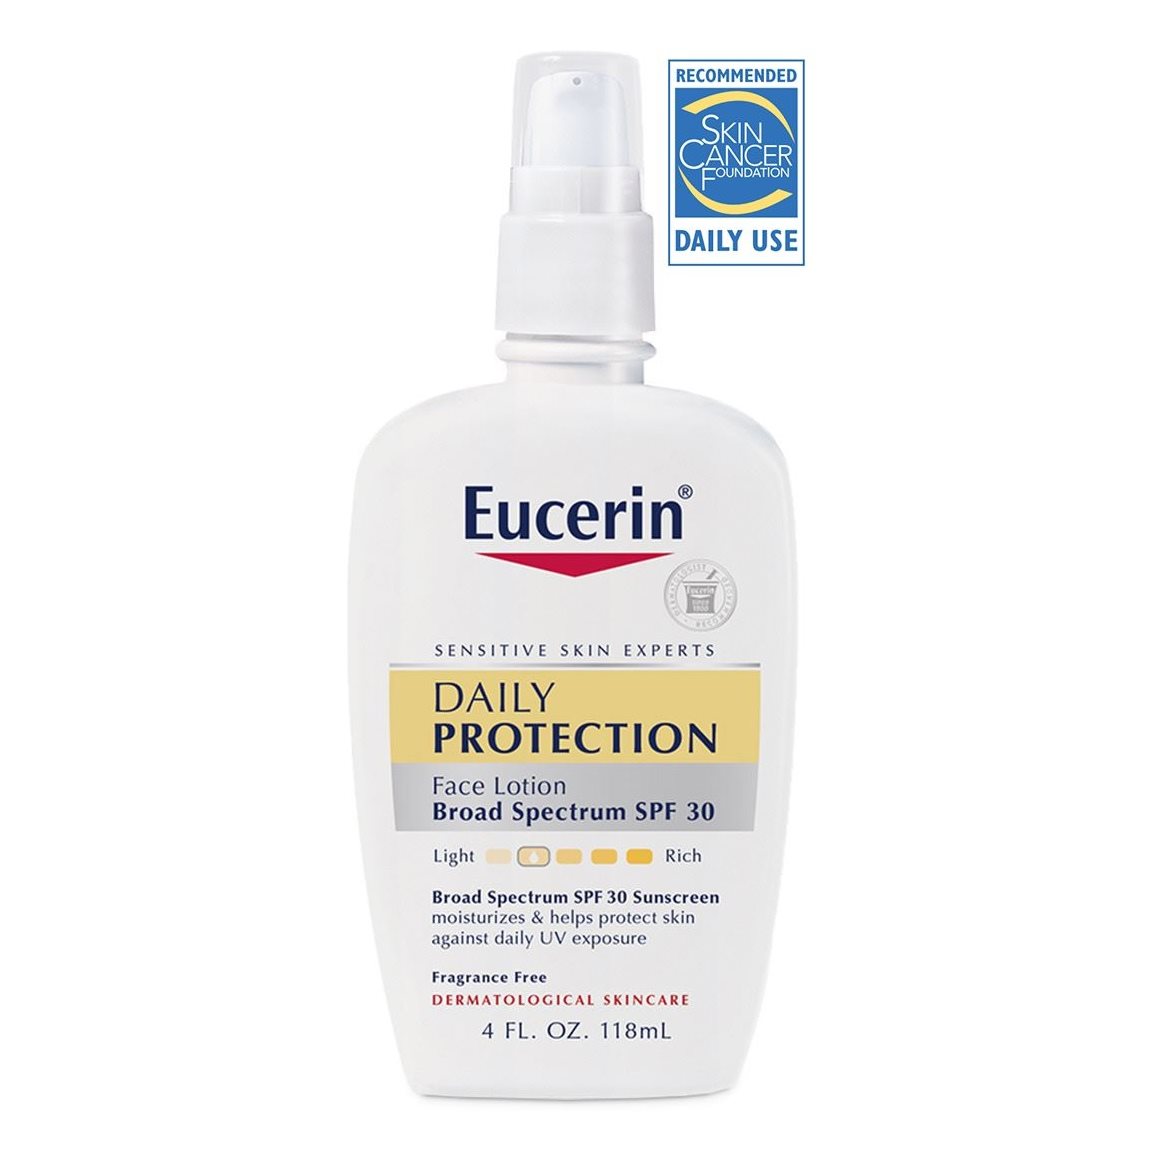 Daily Protection Face Lotion Broad Spectrum SPF 30
